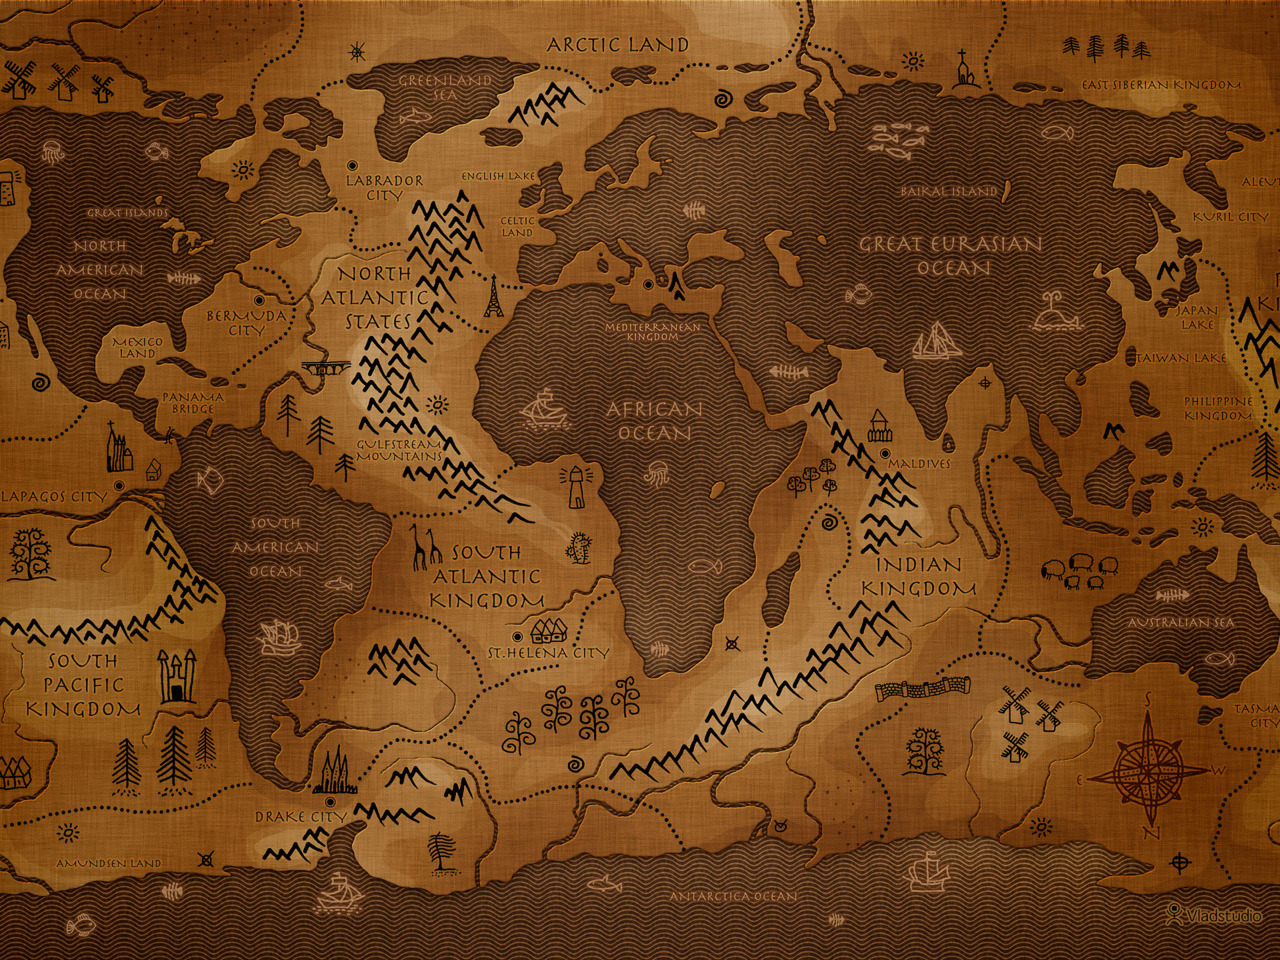 World map for wall boys room